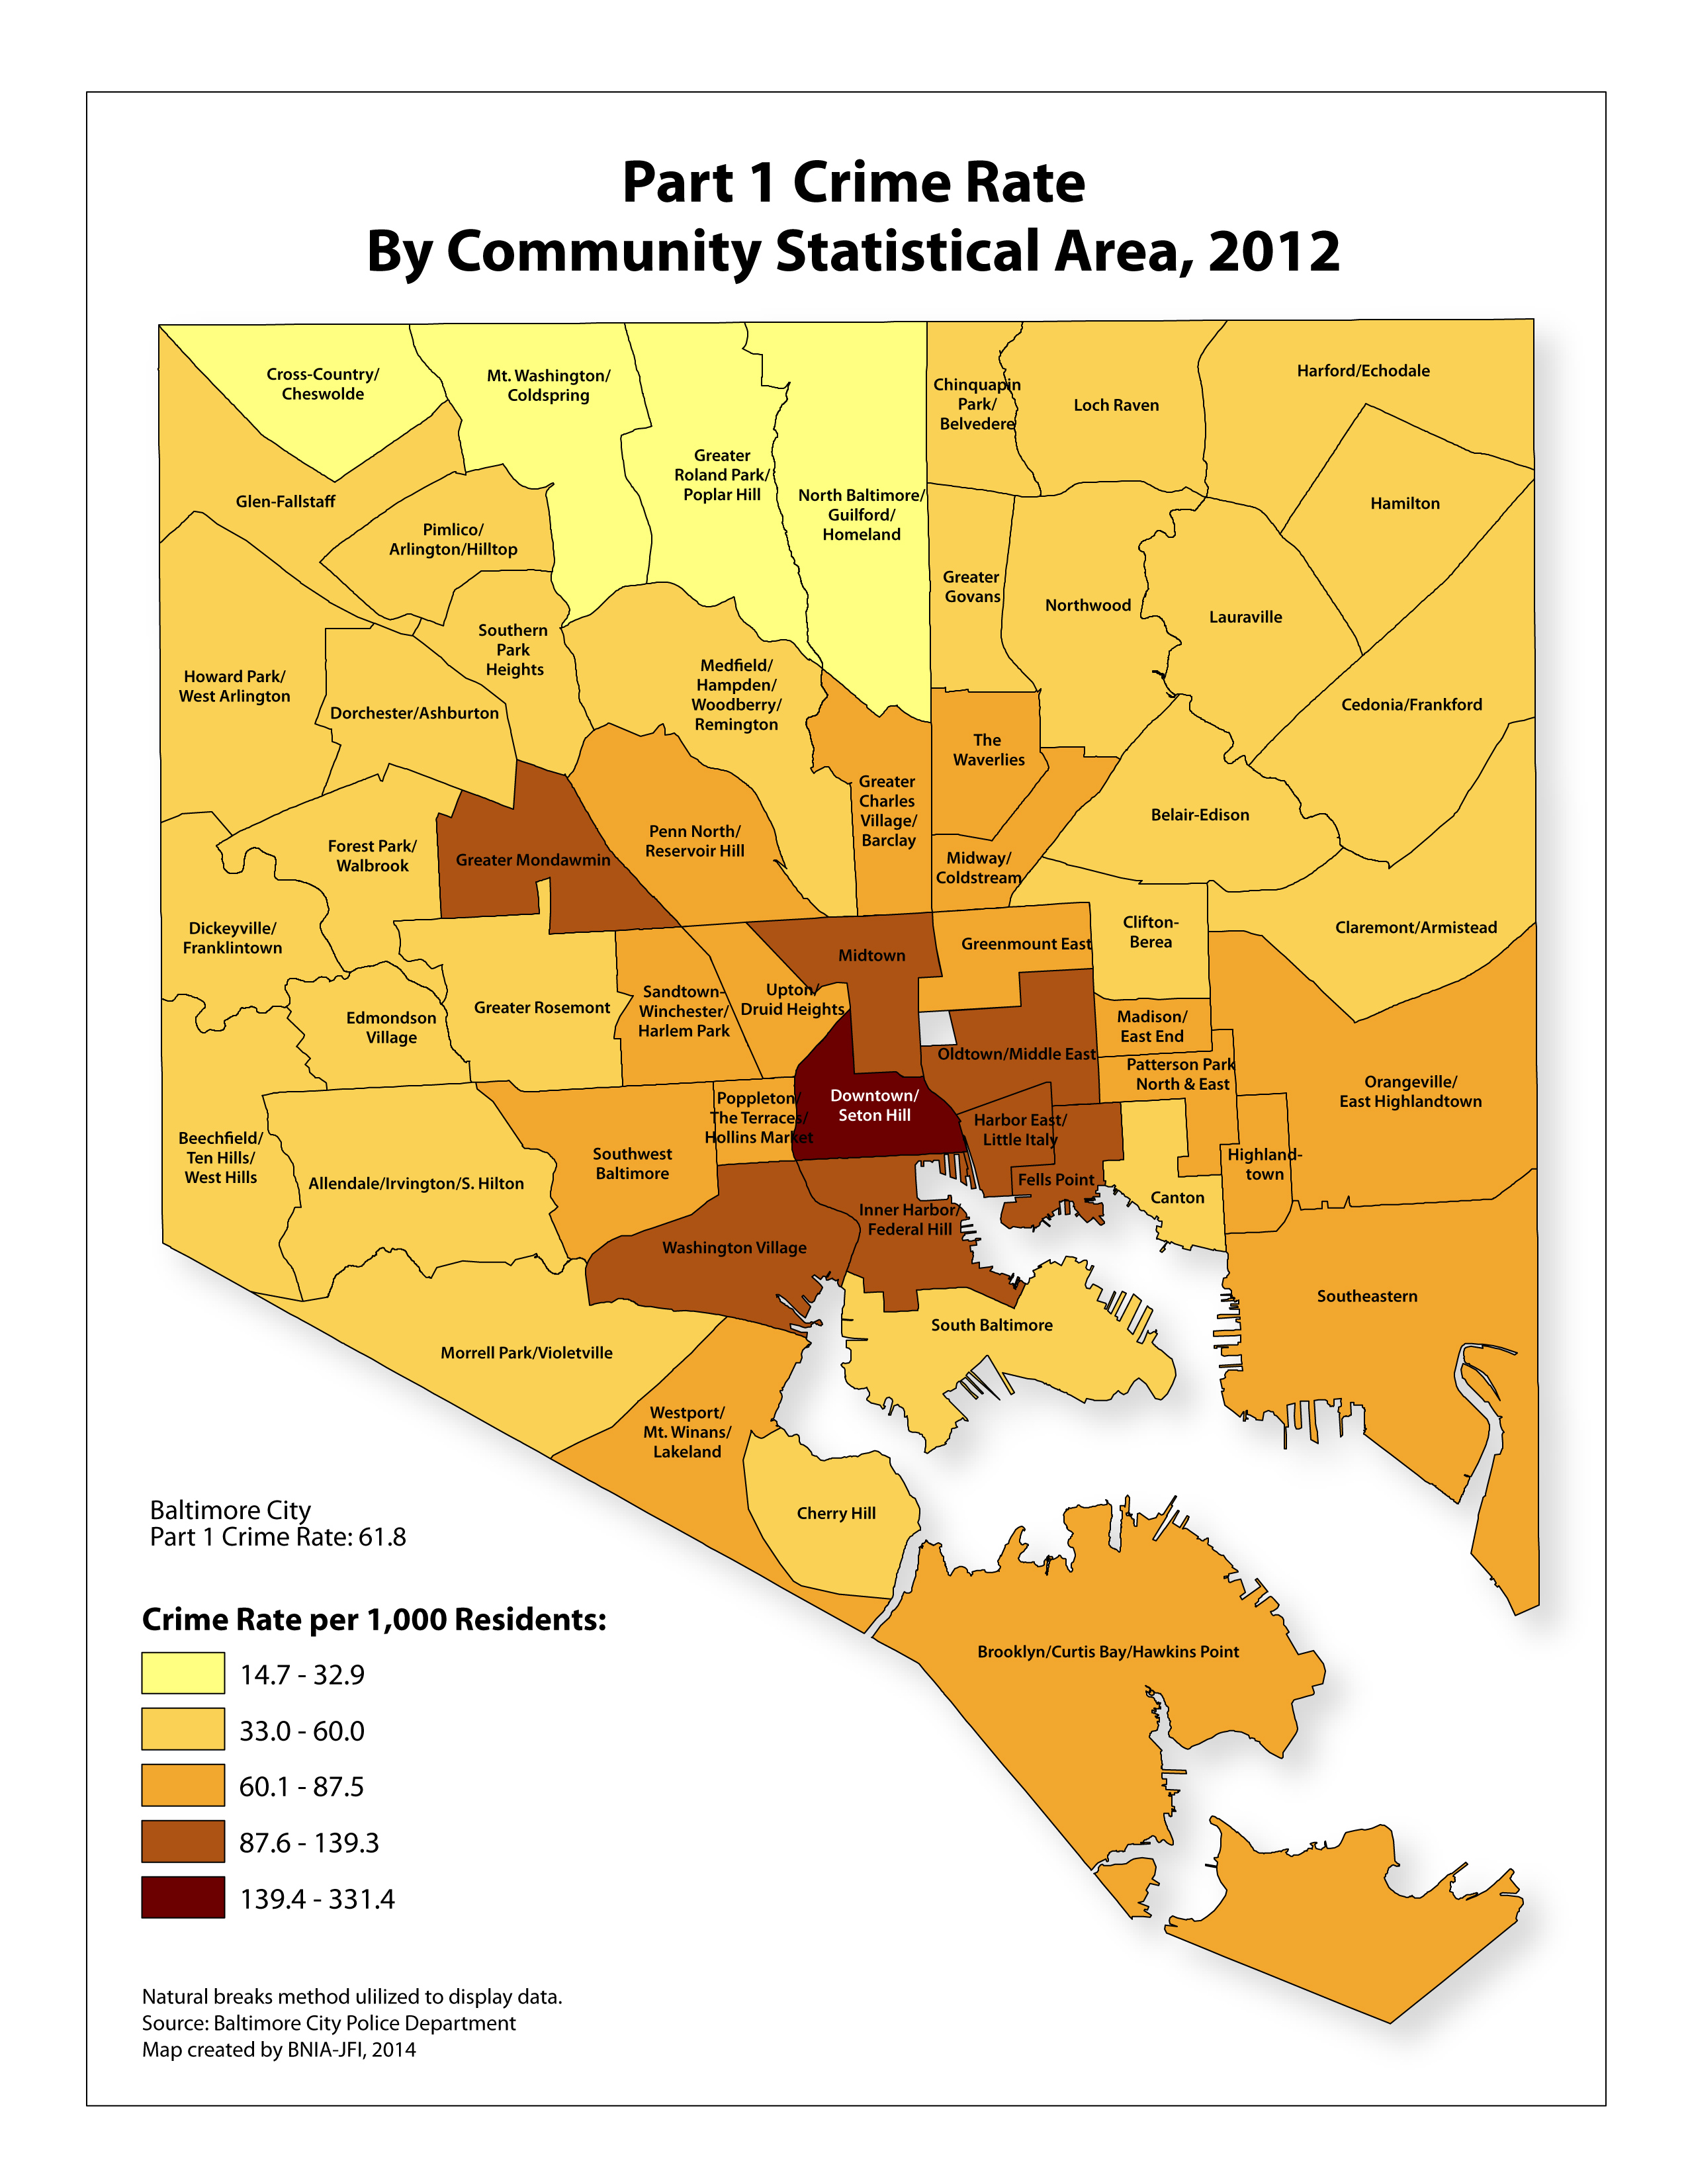 Gallery Vital Signs 12 Crime and Safety Maps BNIA Baltimore